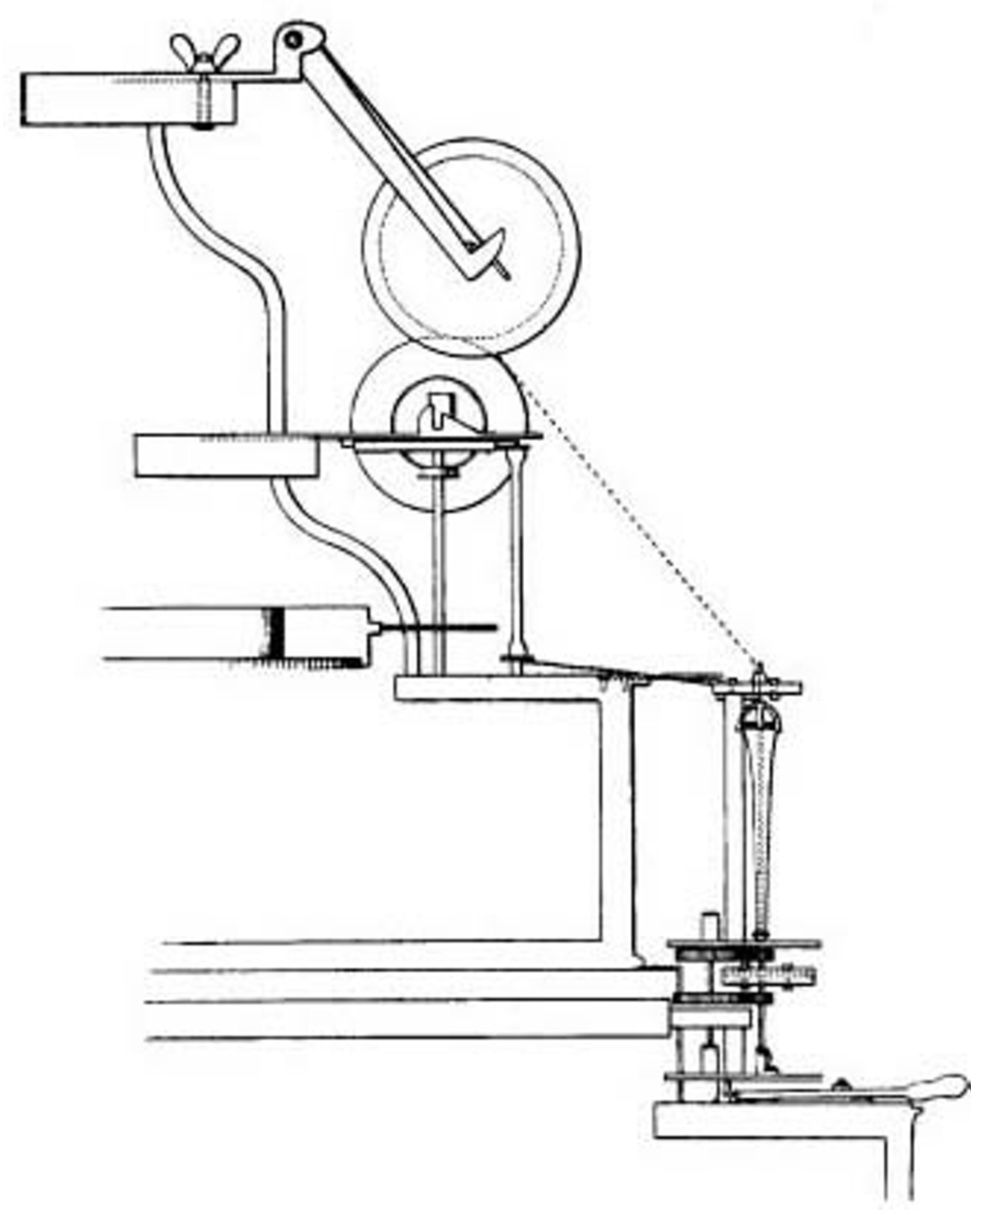 Plate 8.6. Enlarged view of the rollers, spindle and bobbin (Wyatt and Paul)